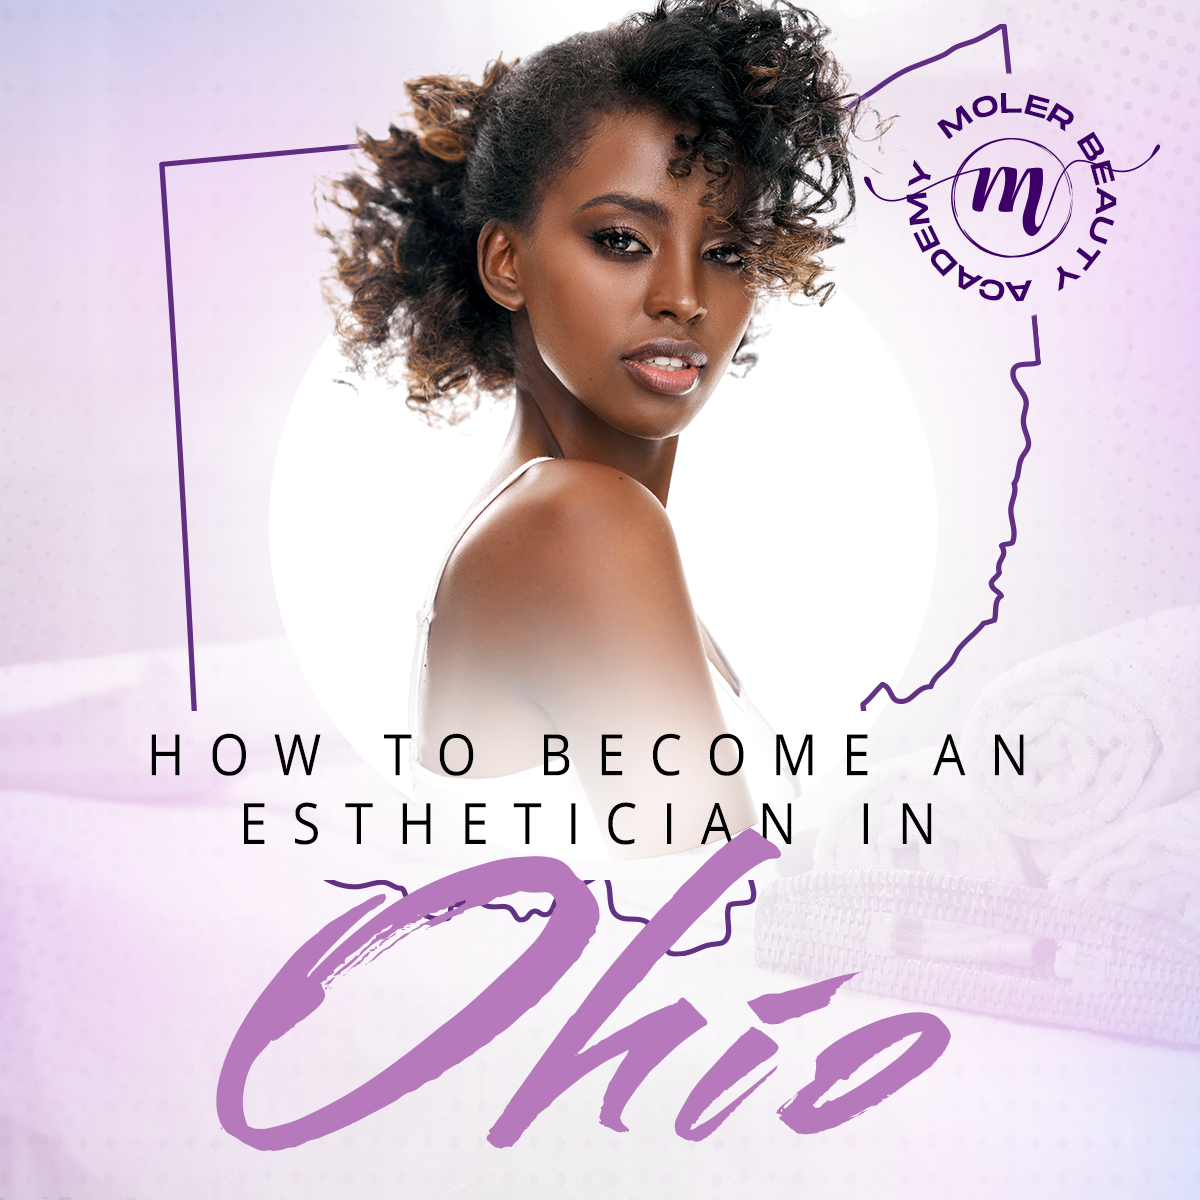 How to Become an Esthetician in Ohio